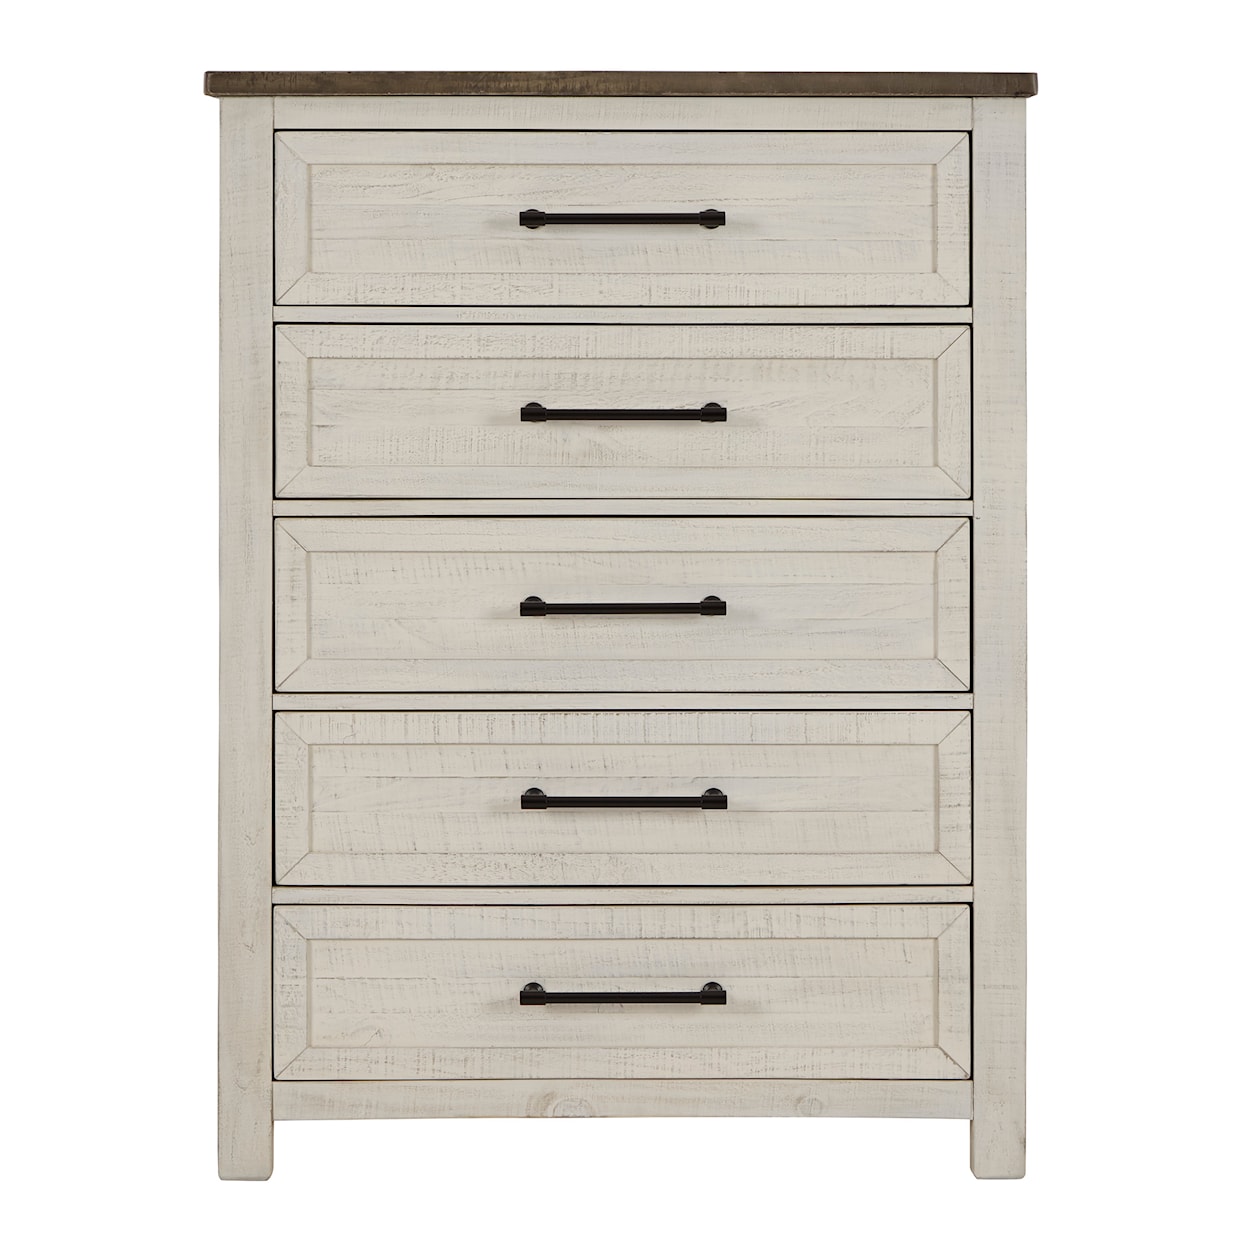 Benchcraft Brewgan Chest of Drawers